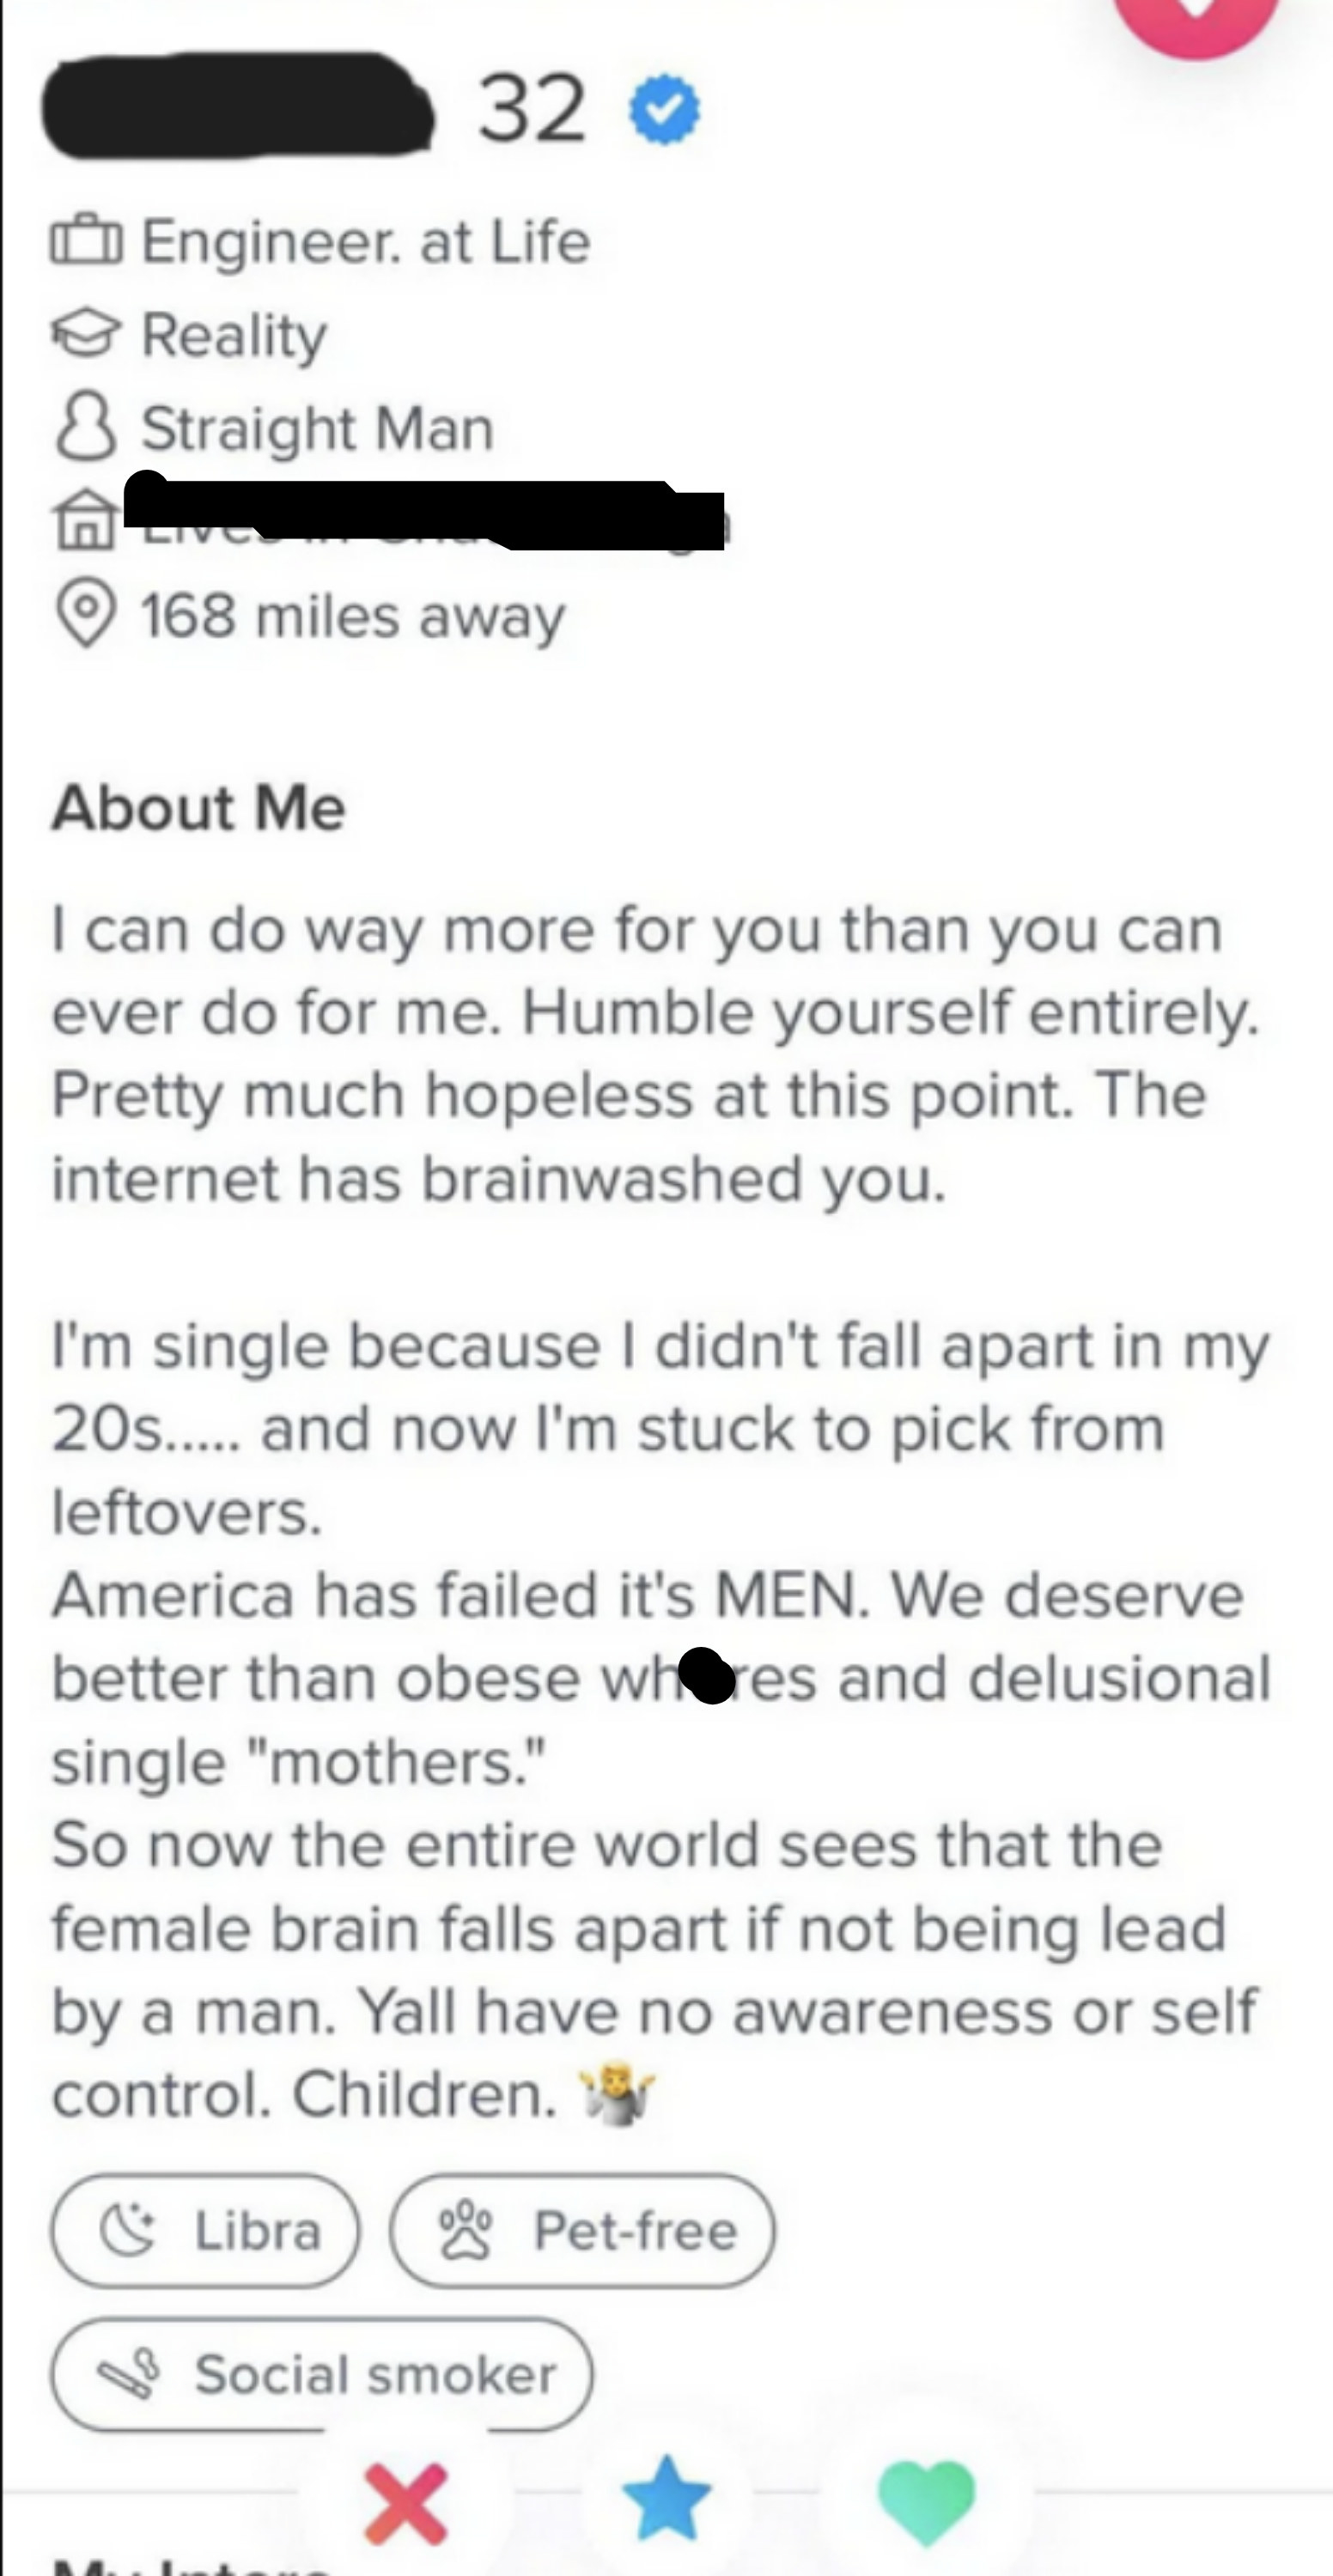 This man&#x27;s entire About Me section is misogynist, ending with &quot;America has failed its men, we deserve better than obese whores and delusional single mothers&quot;